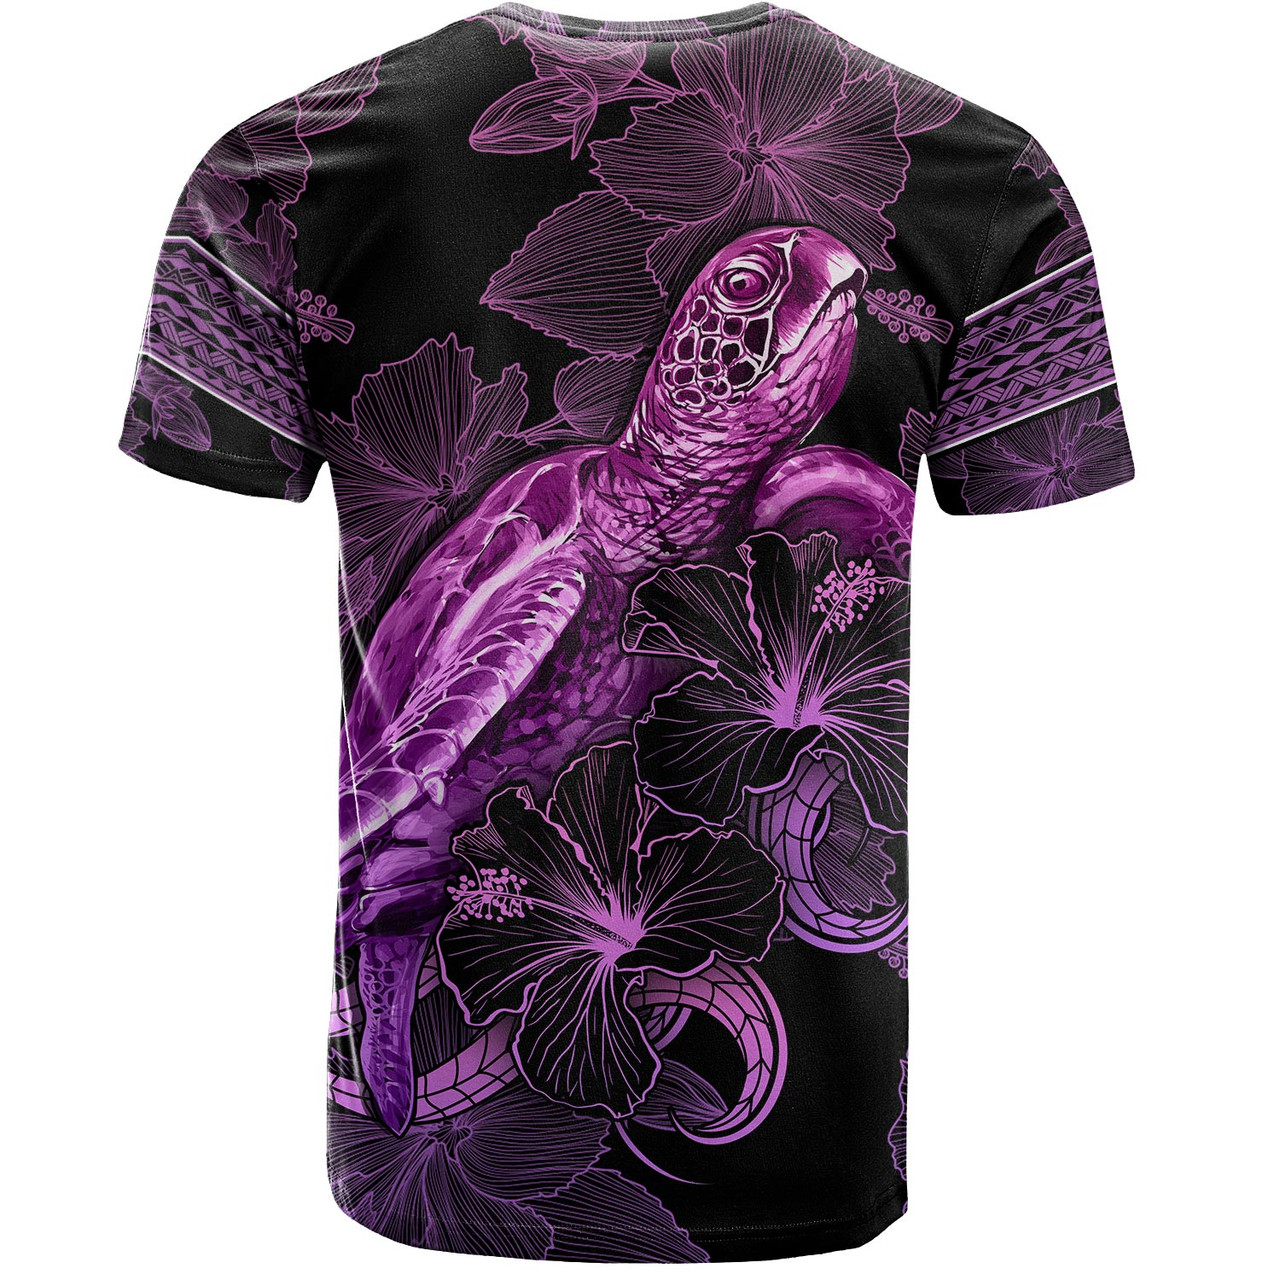 Papua New Guinea T-Shirt Sea Turtle With Blooming Hibiscus Flowers Tribal Purple